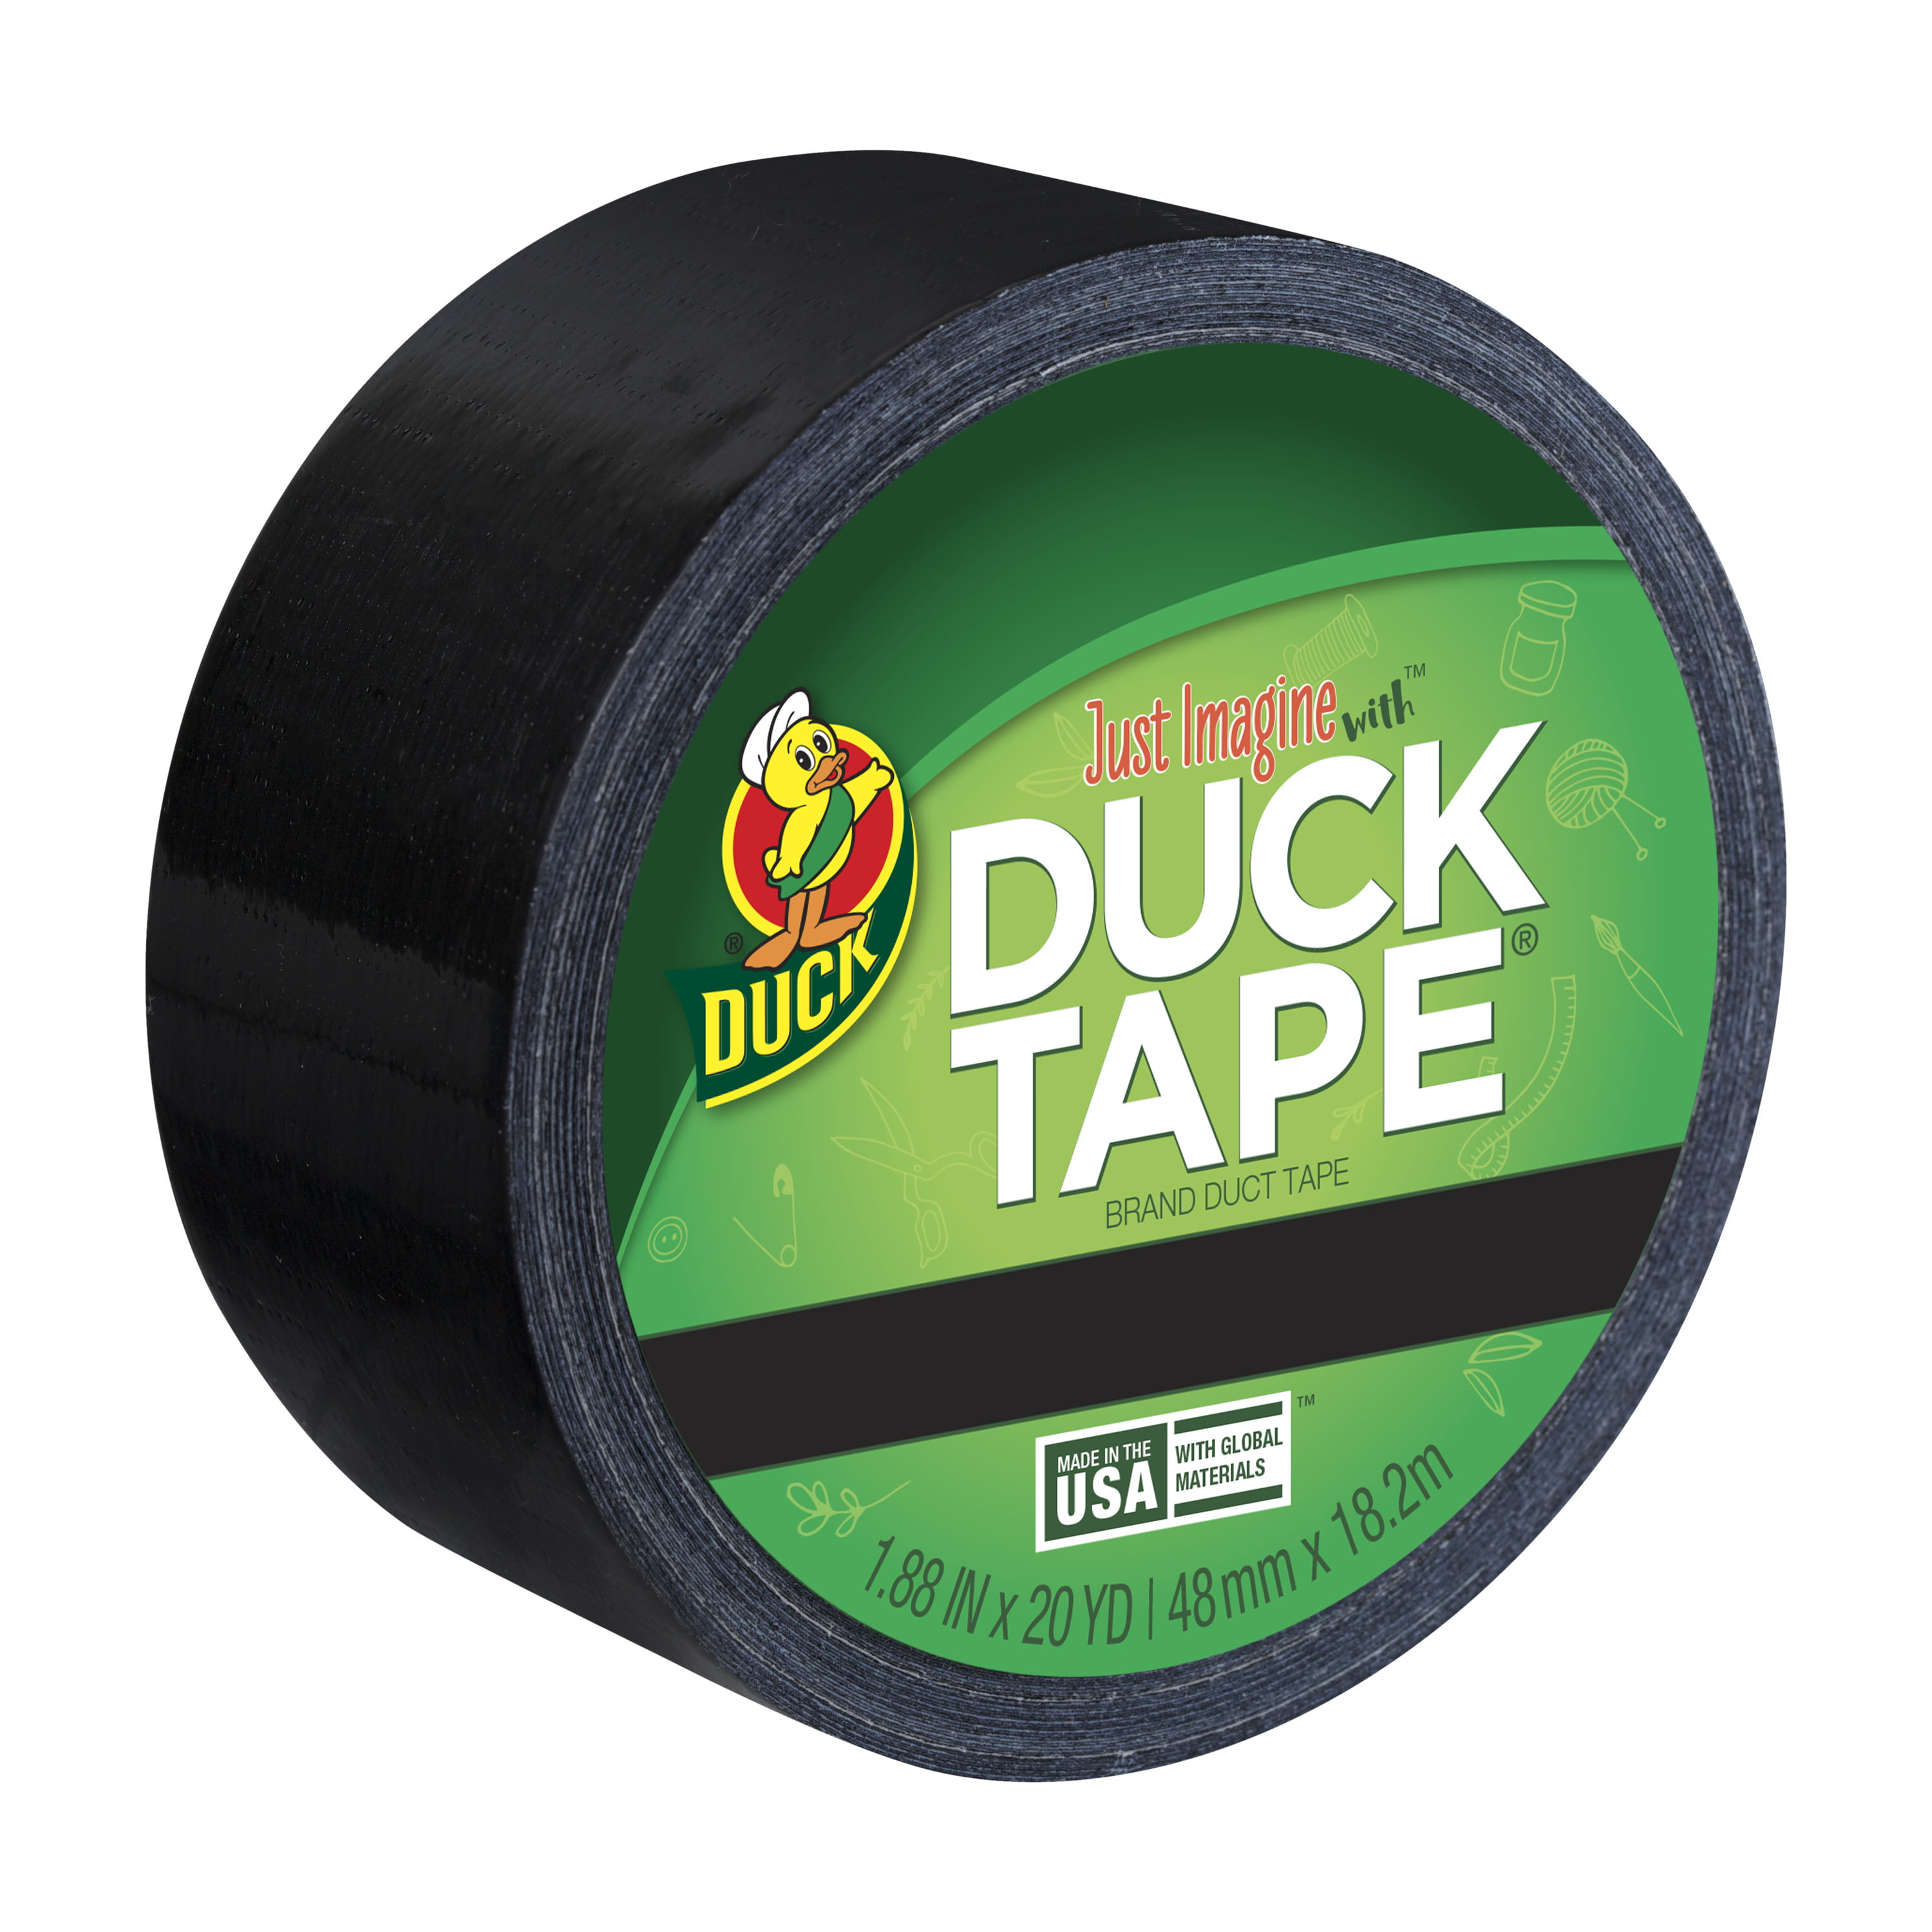 1.88 in. x 20 Yds. Multi-Use Orange Colored Duct Tape (1 Roll)